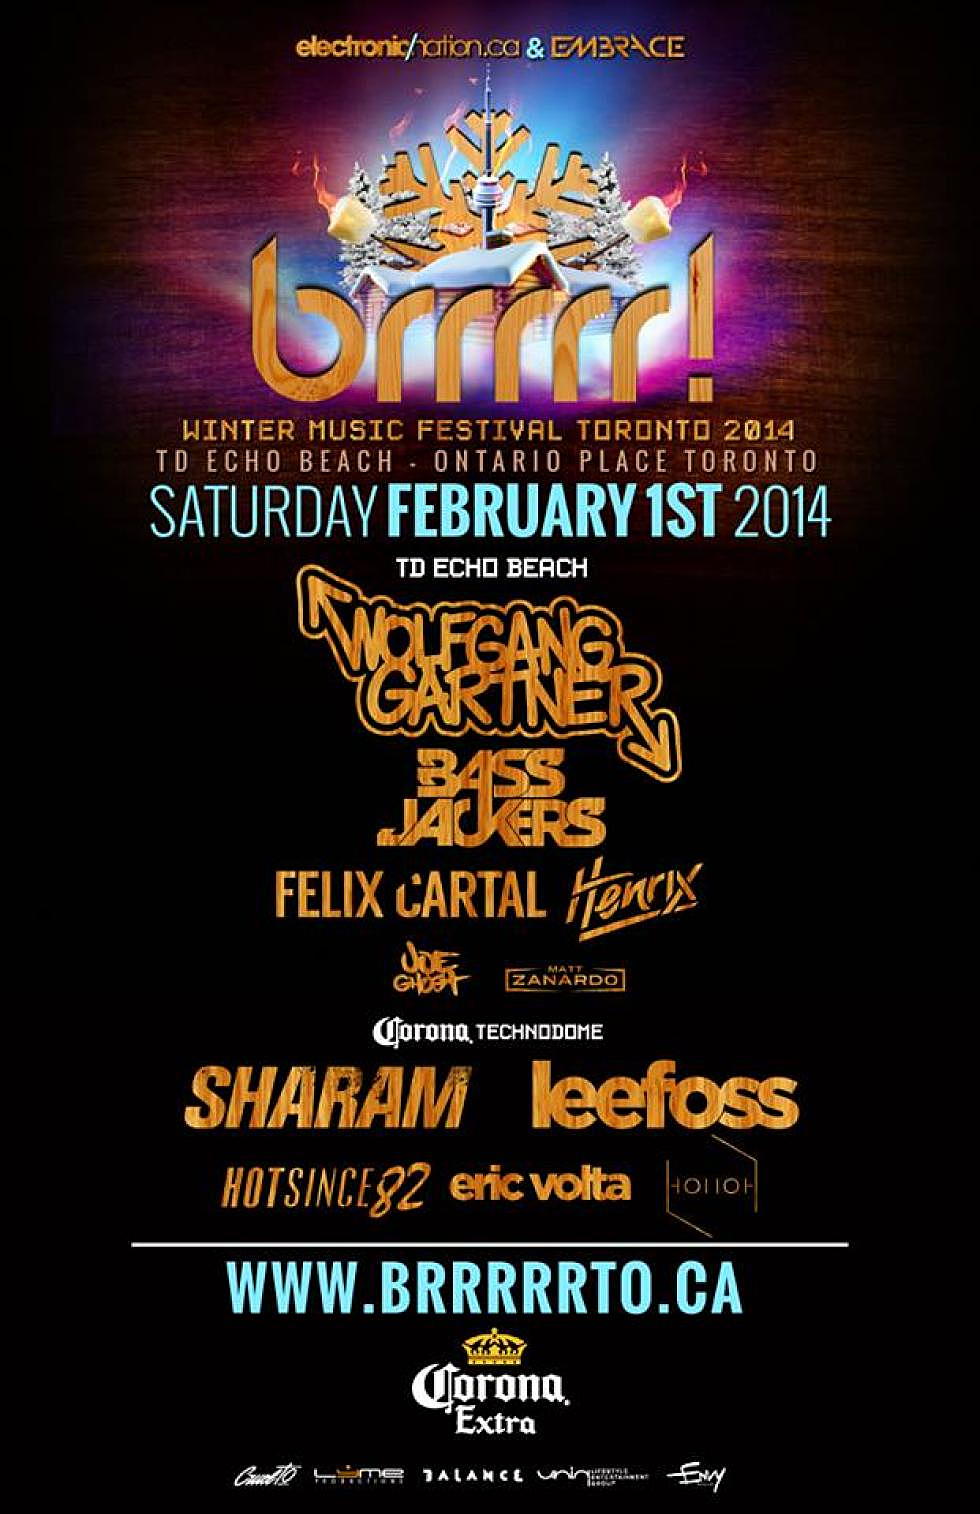 Win Tickets To Brrrrr! Music Festival With Henrix, Wolfgang Gartner, Bassjackers, and more!